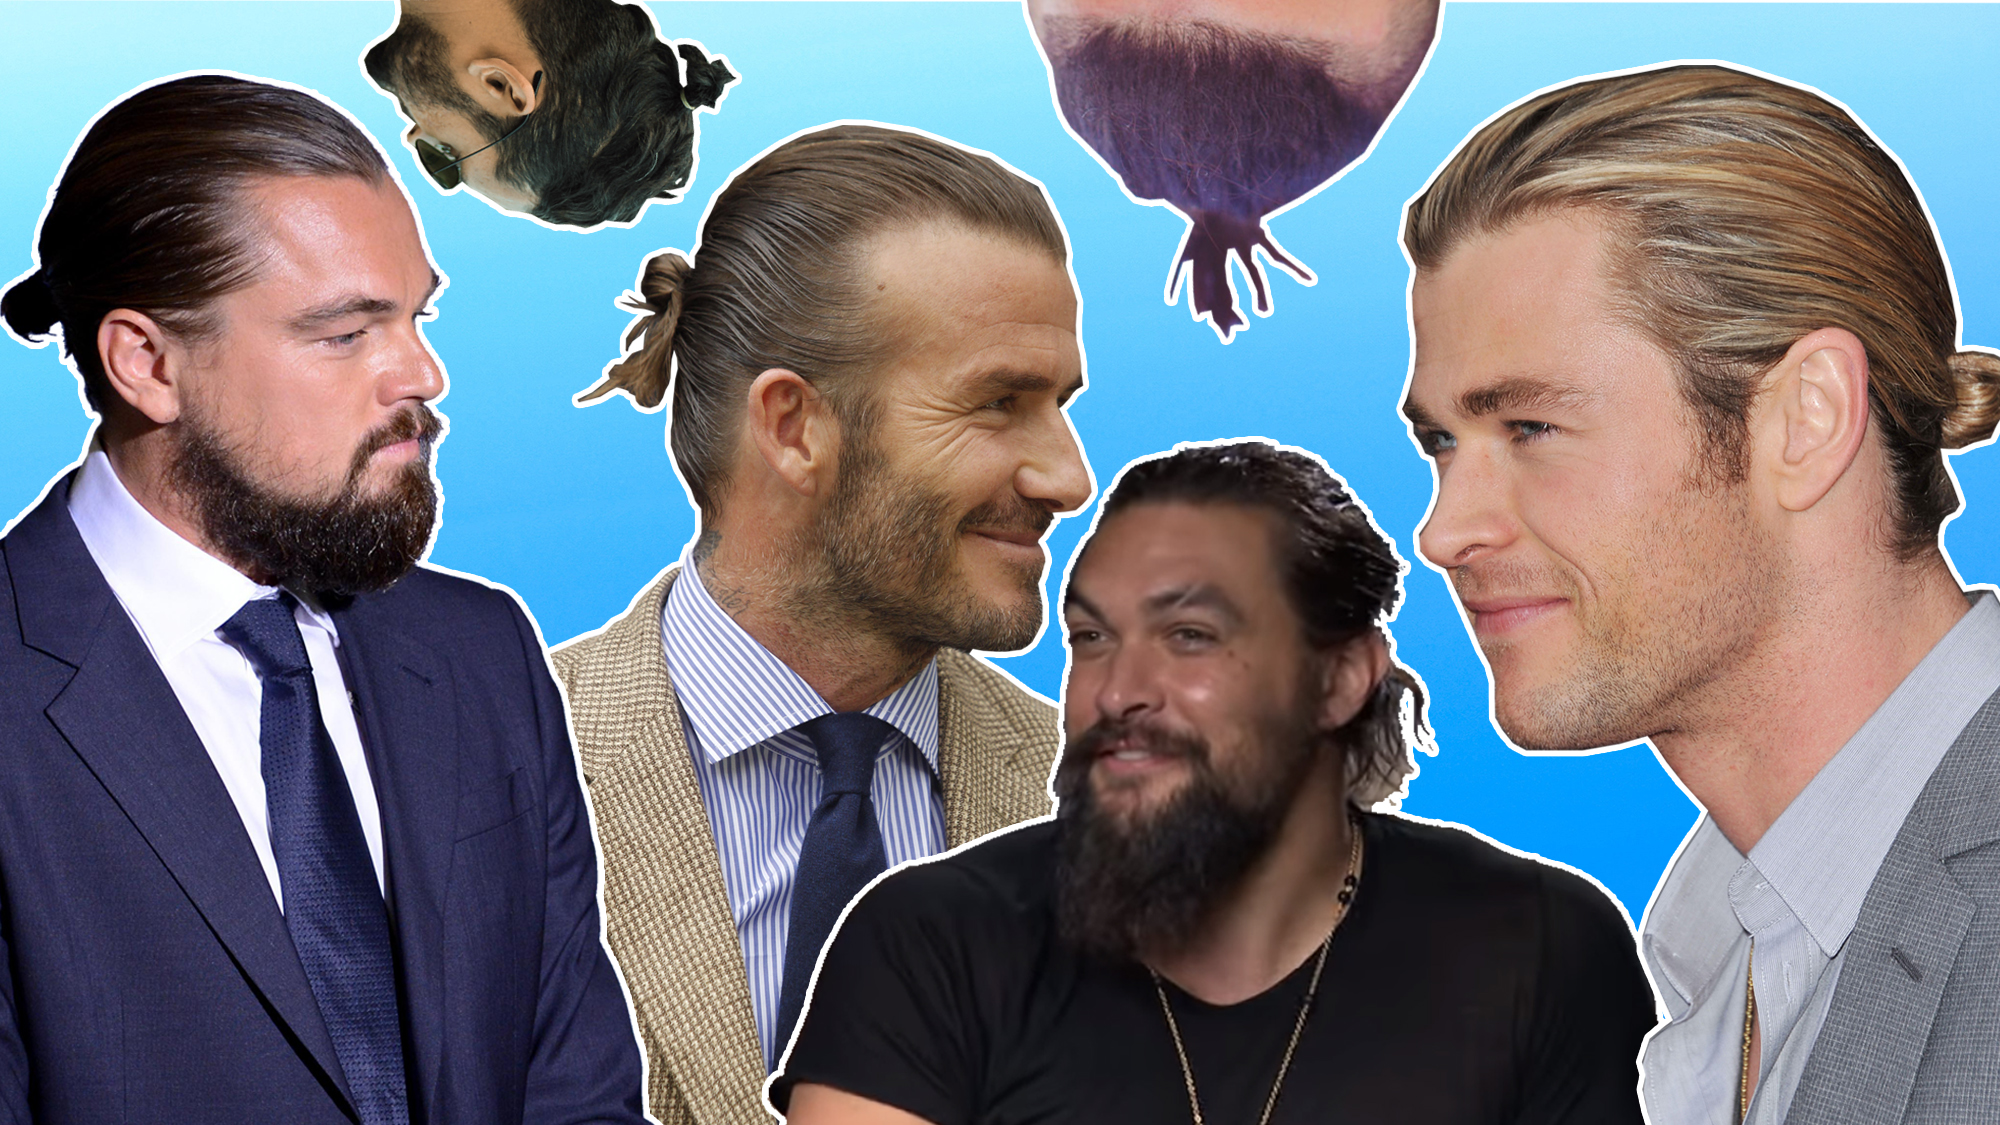 ✓ How To Tie The Perfect Man Bun/Top Knot - Men's Hairstyle Ideas - YouTube